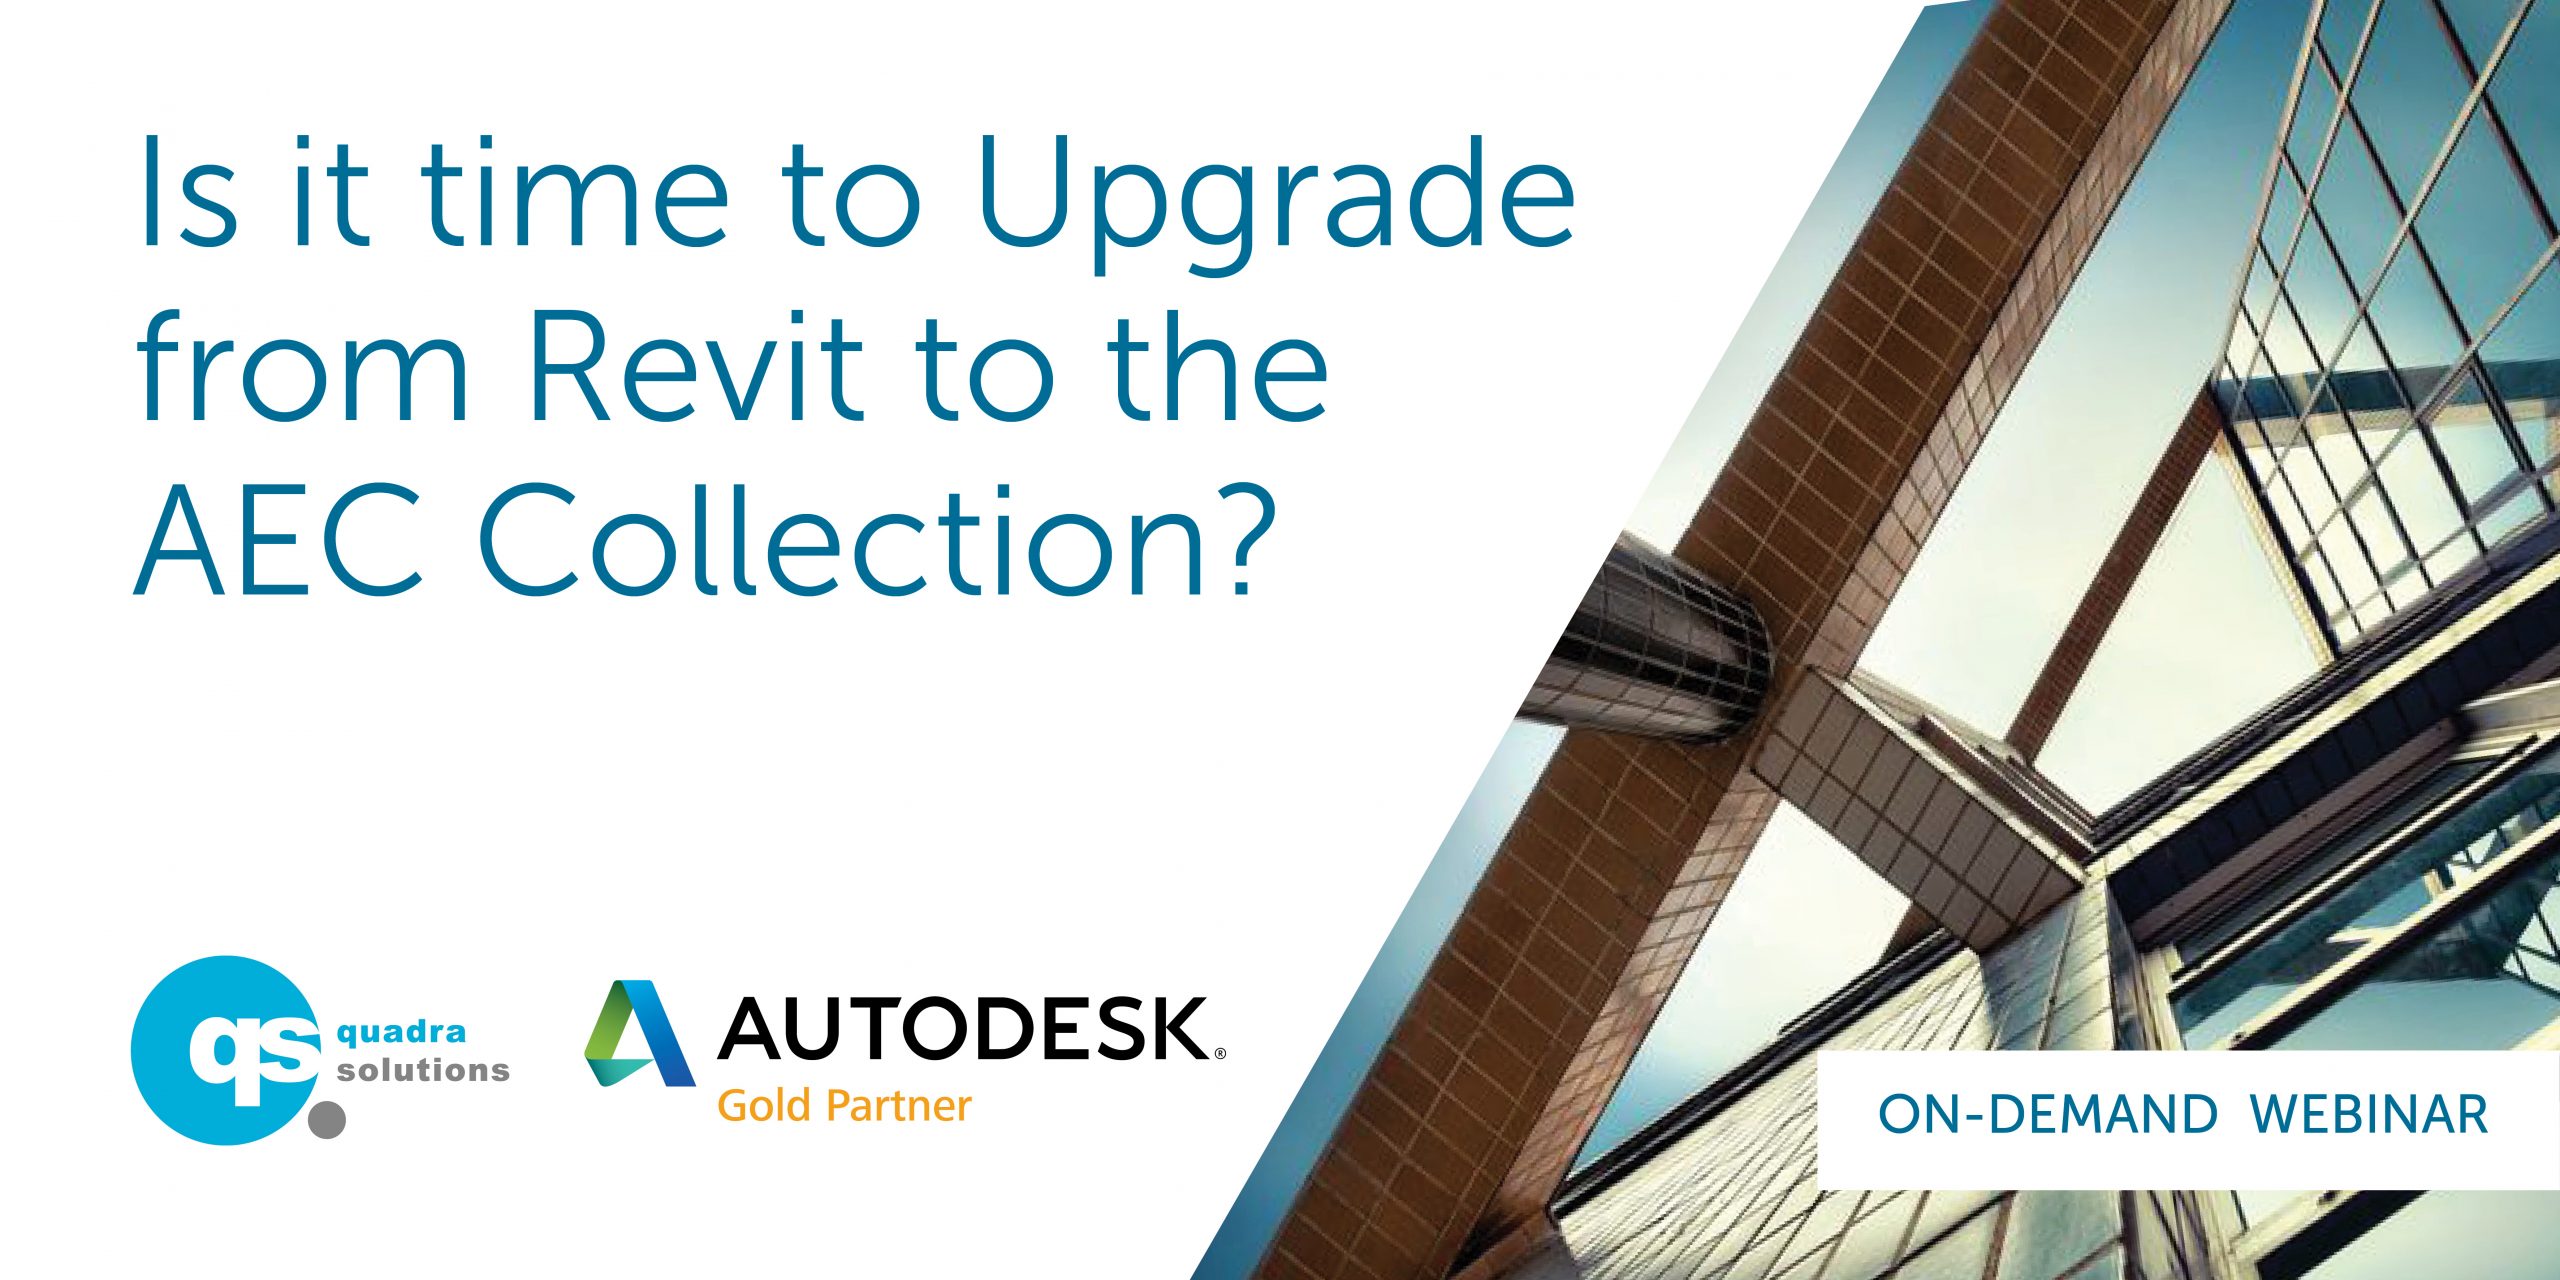 Is it time to Upgrade from Revit to the AEC Collection?